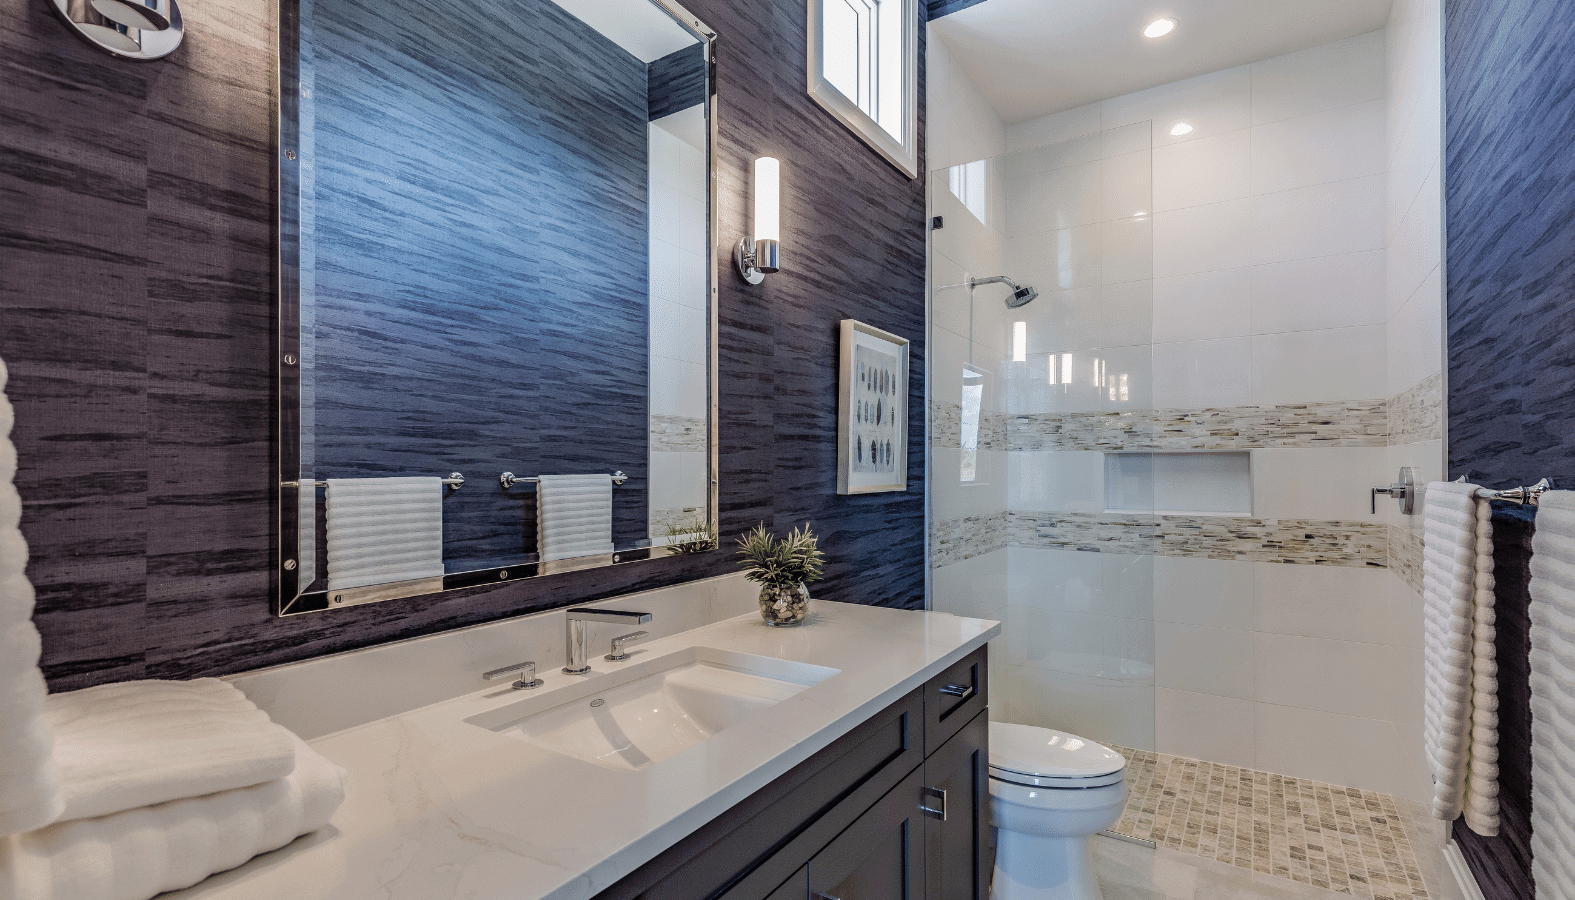 11 Bathroom Remodeling Ideas (To Totally Transform Your Bathroom!)